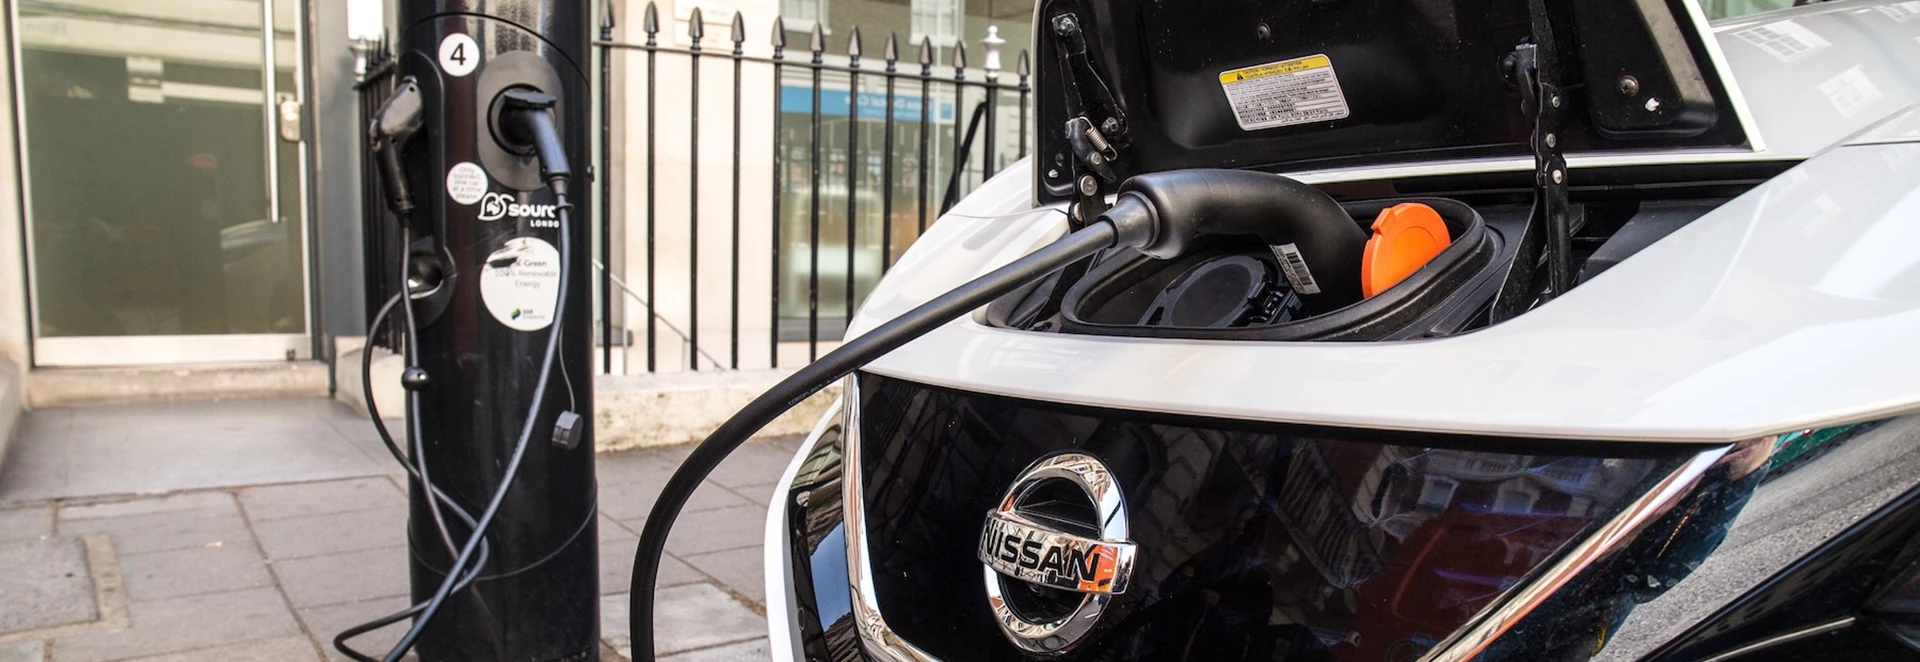  The UK now has more EV charging stations than petrol stations